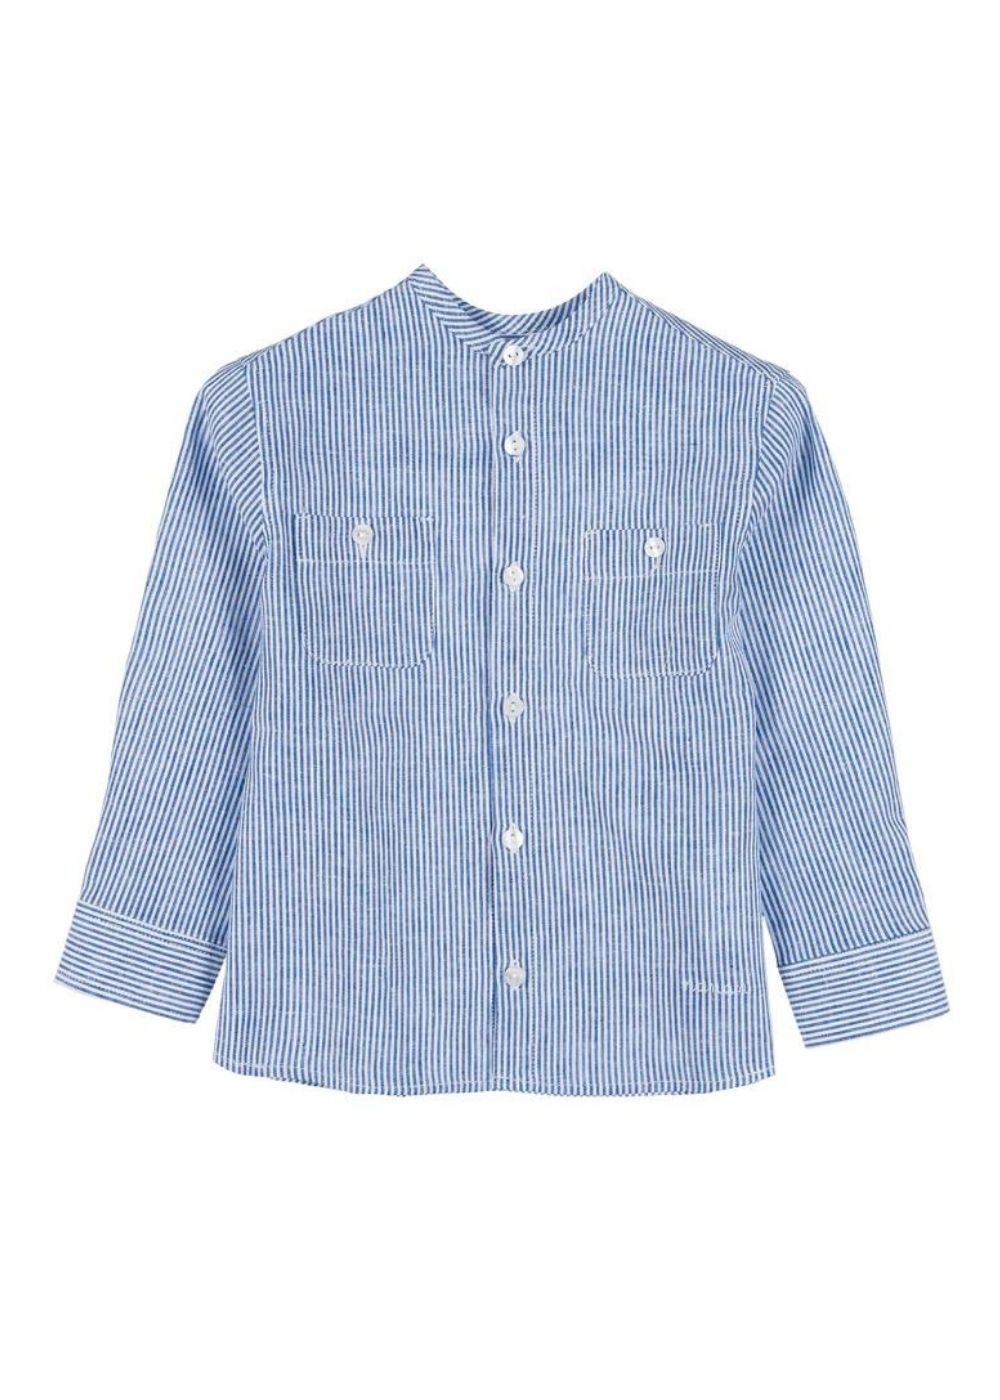 Featured image for “NANÁN CAMICIA IN LINO”